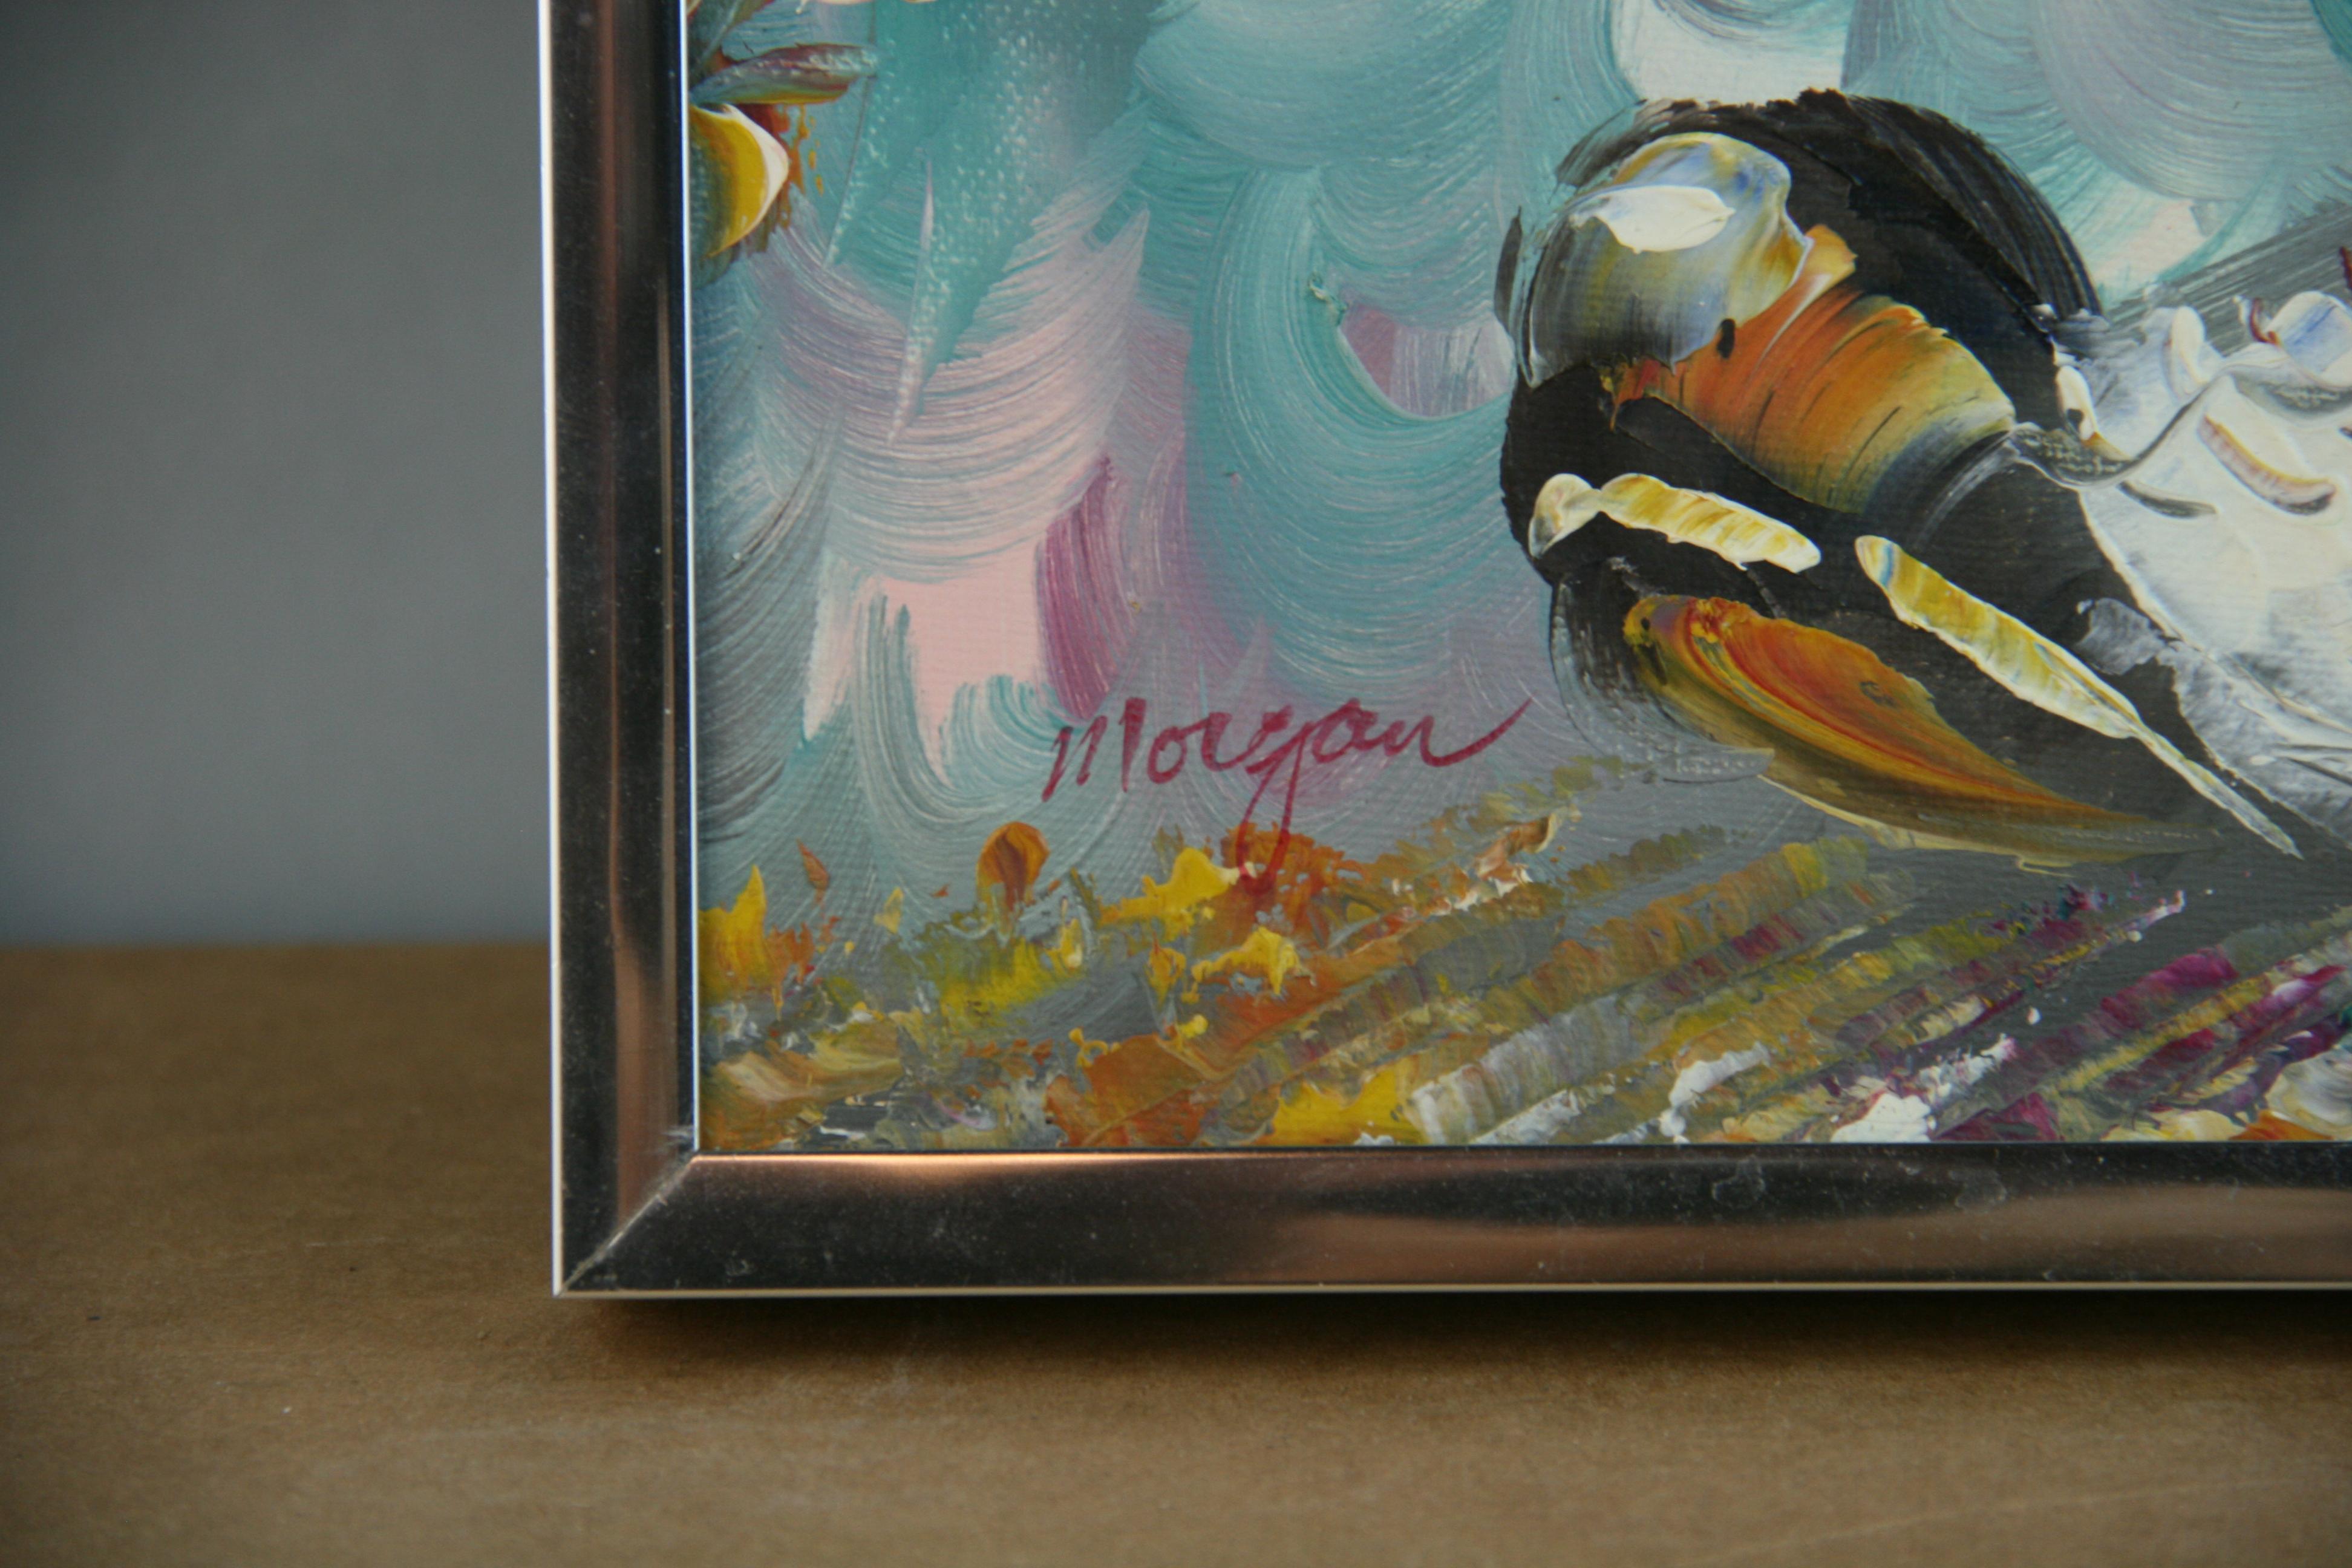 4048 Modern Surreal musician sax player
Set in a metal frame
Signed Morgan for Brenda Polsky Morgan Childs (1942-2008)